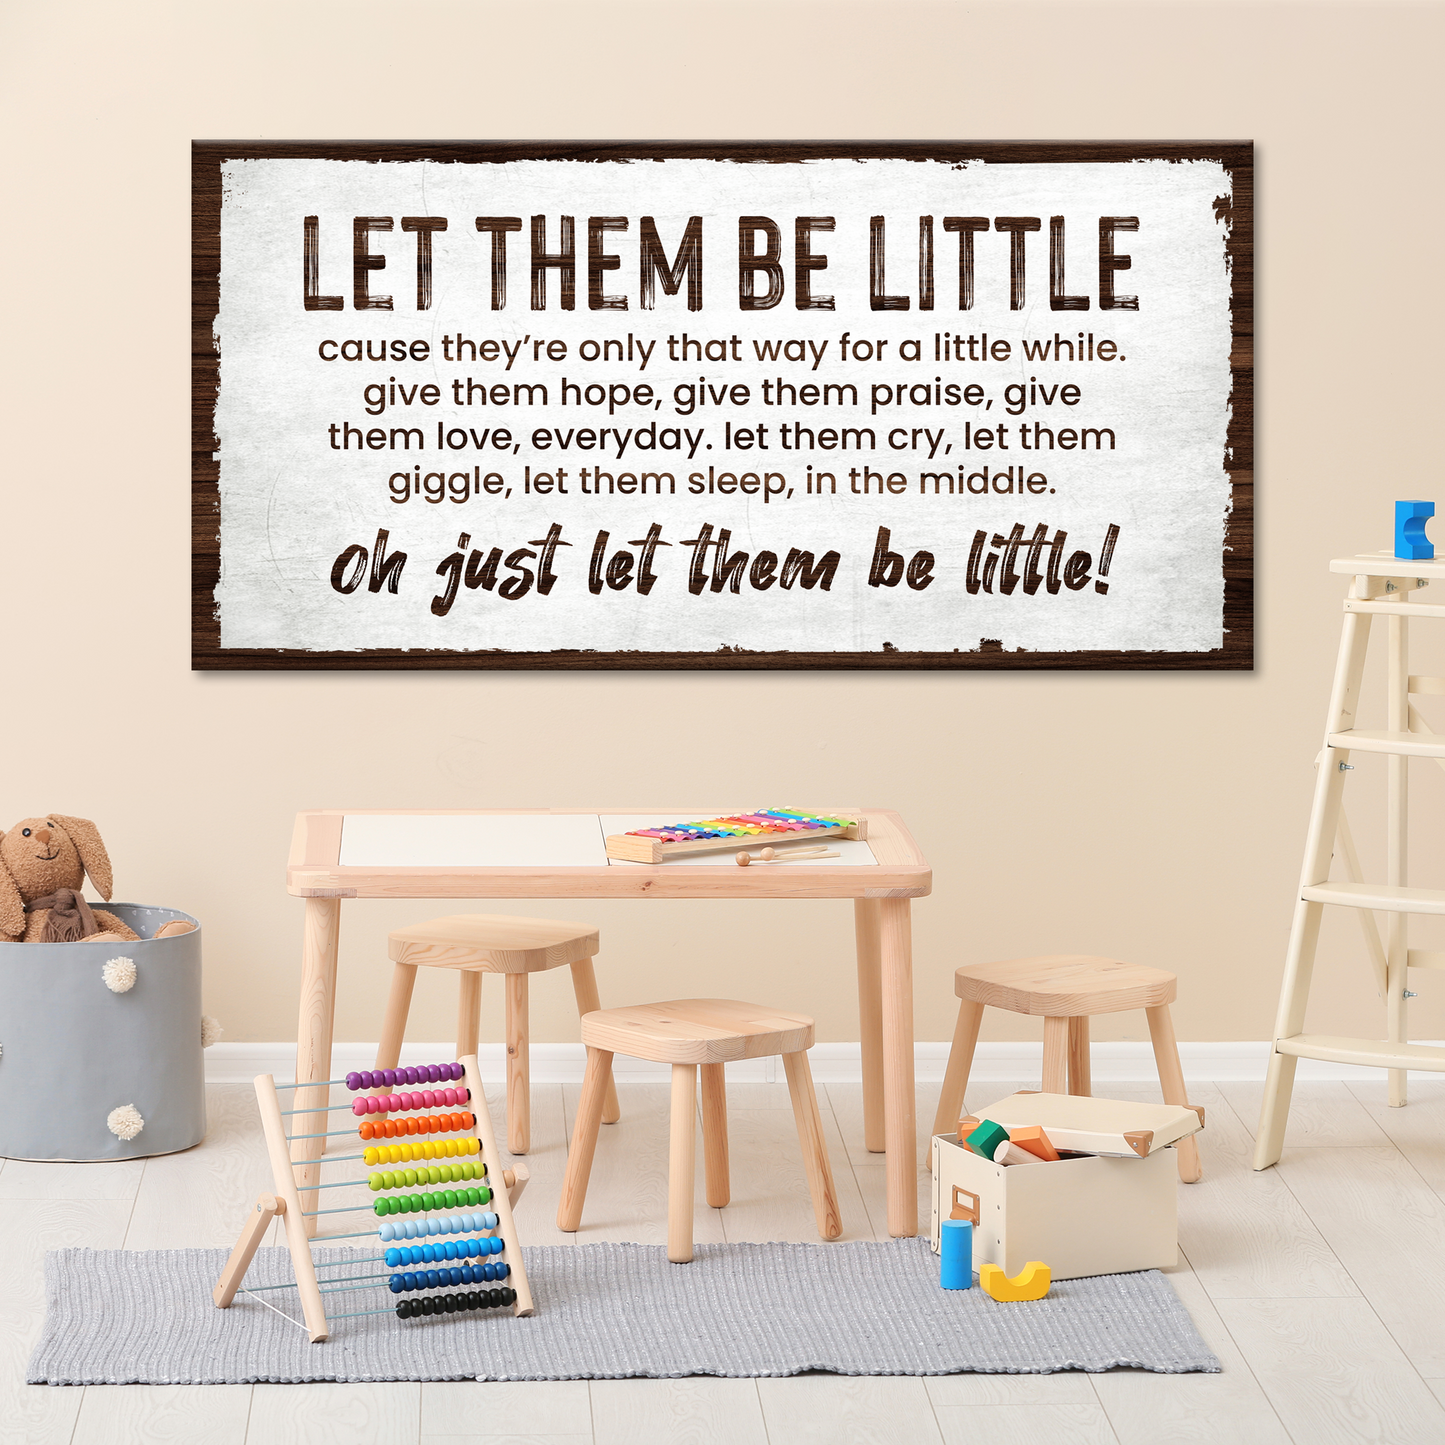 Let them be little Sign - Image by Tailored Canvases